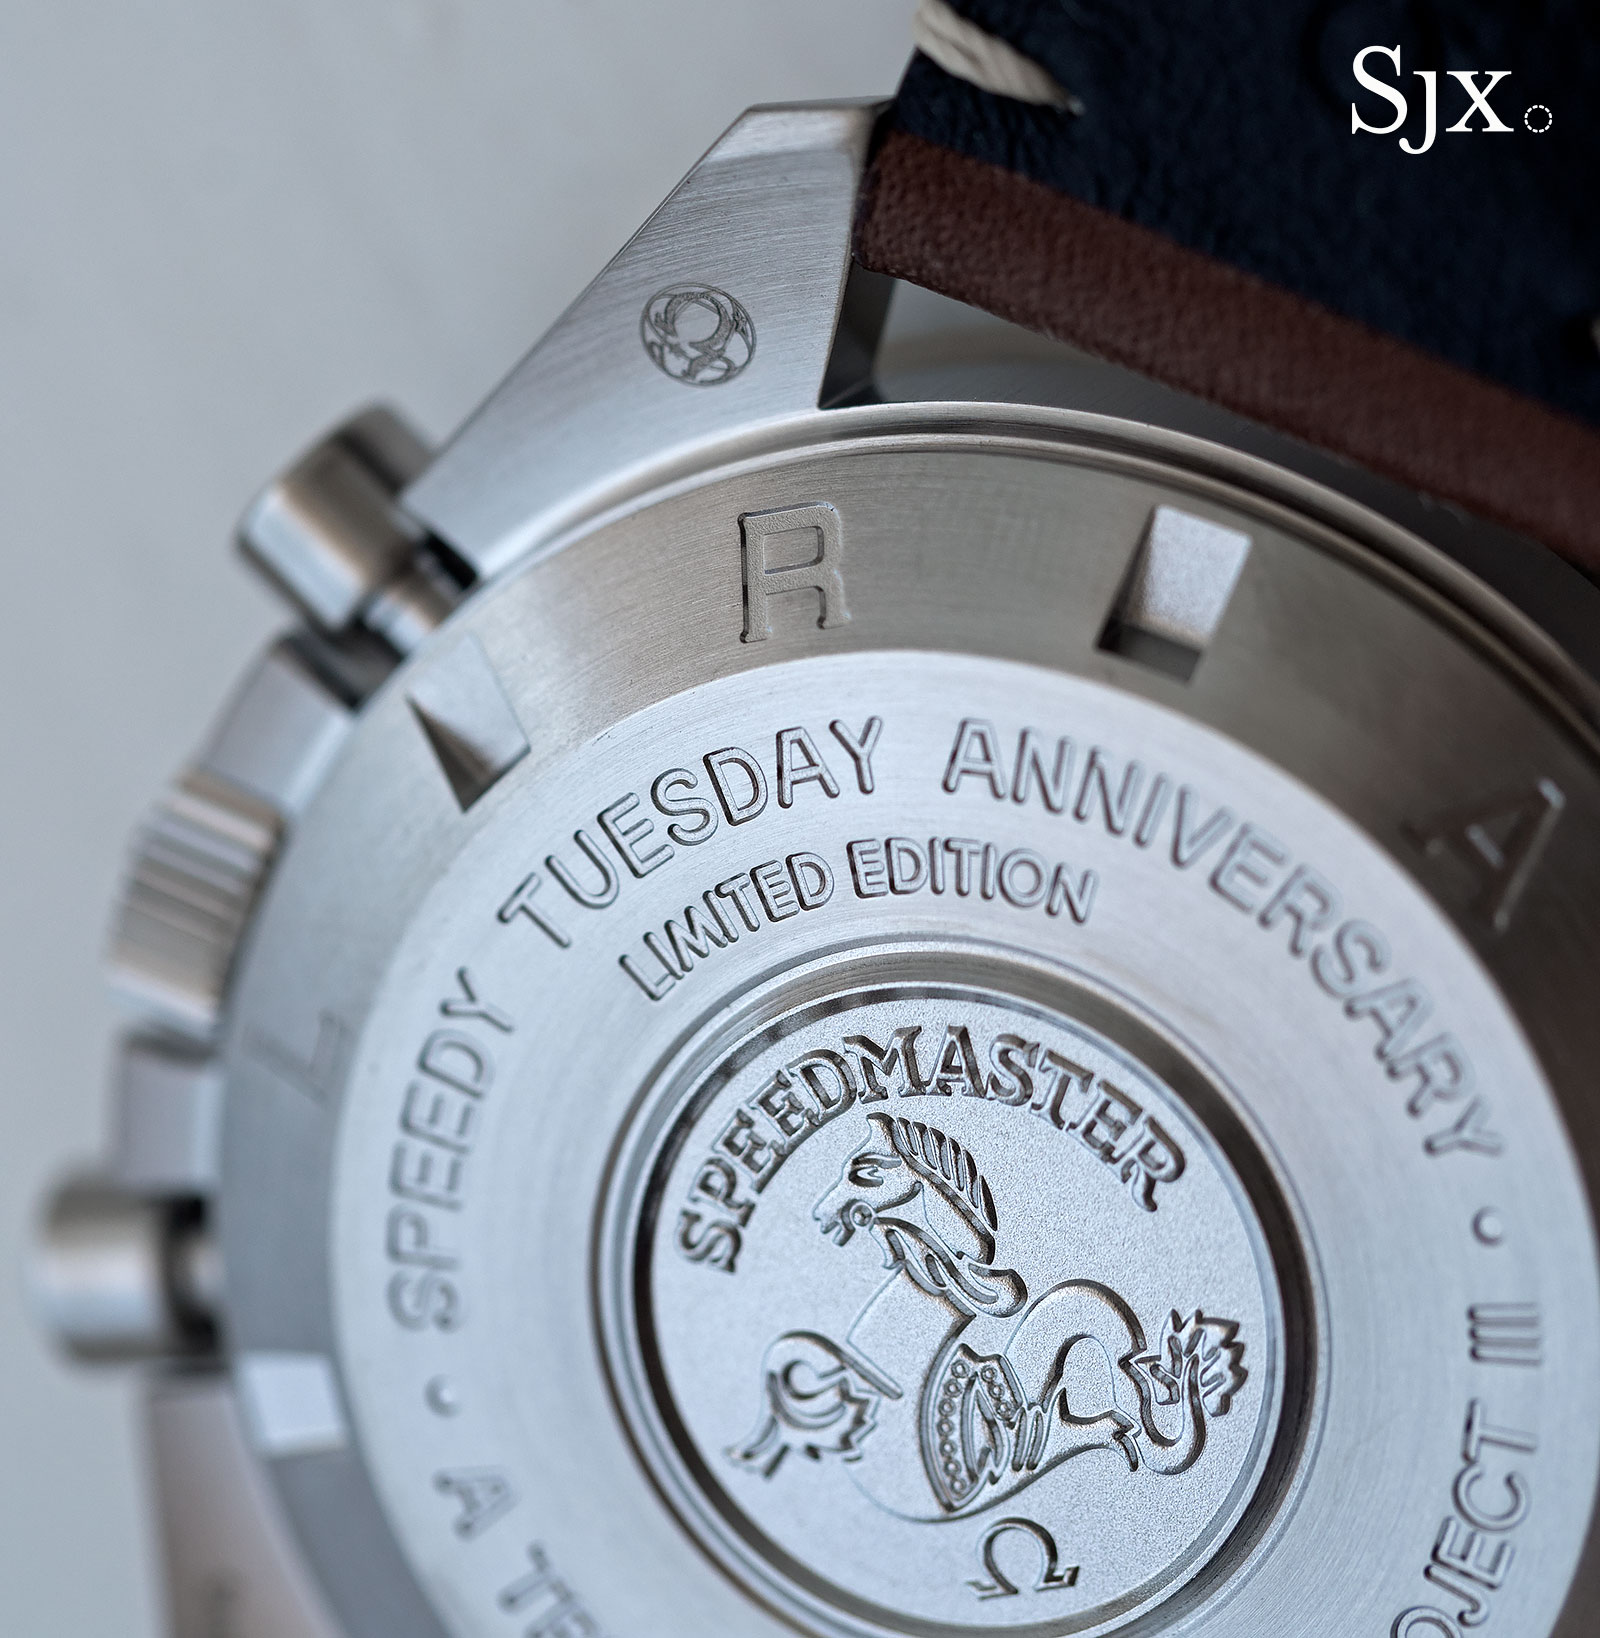 Living With the Omega Speedmaster “Speedy Tuesday” | SJX Watches